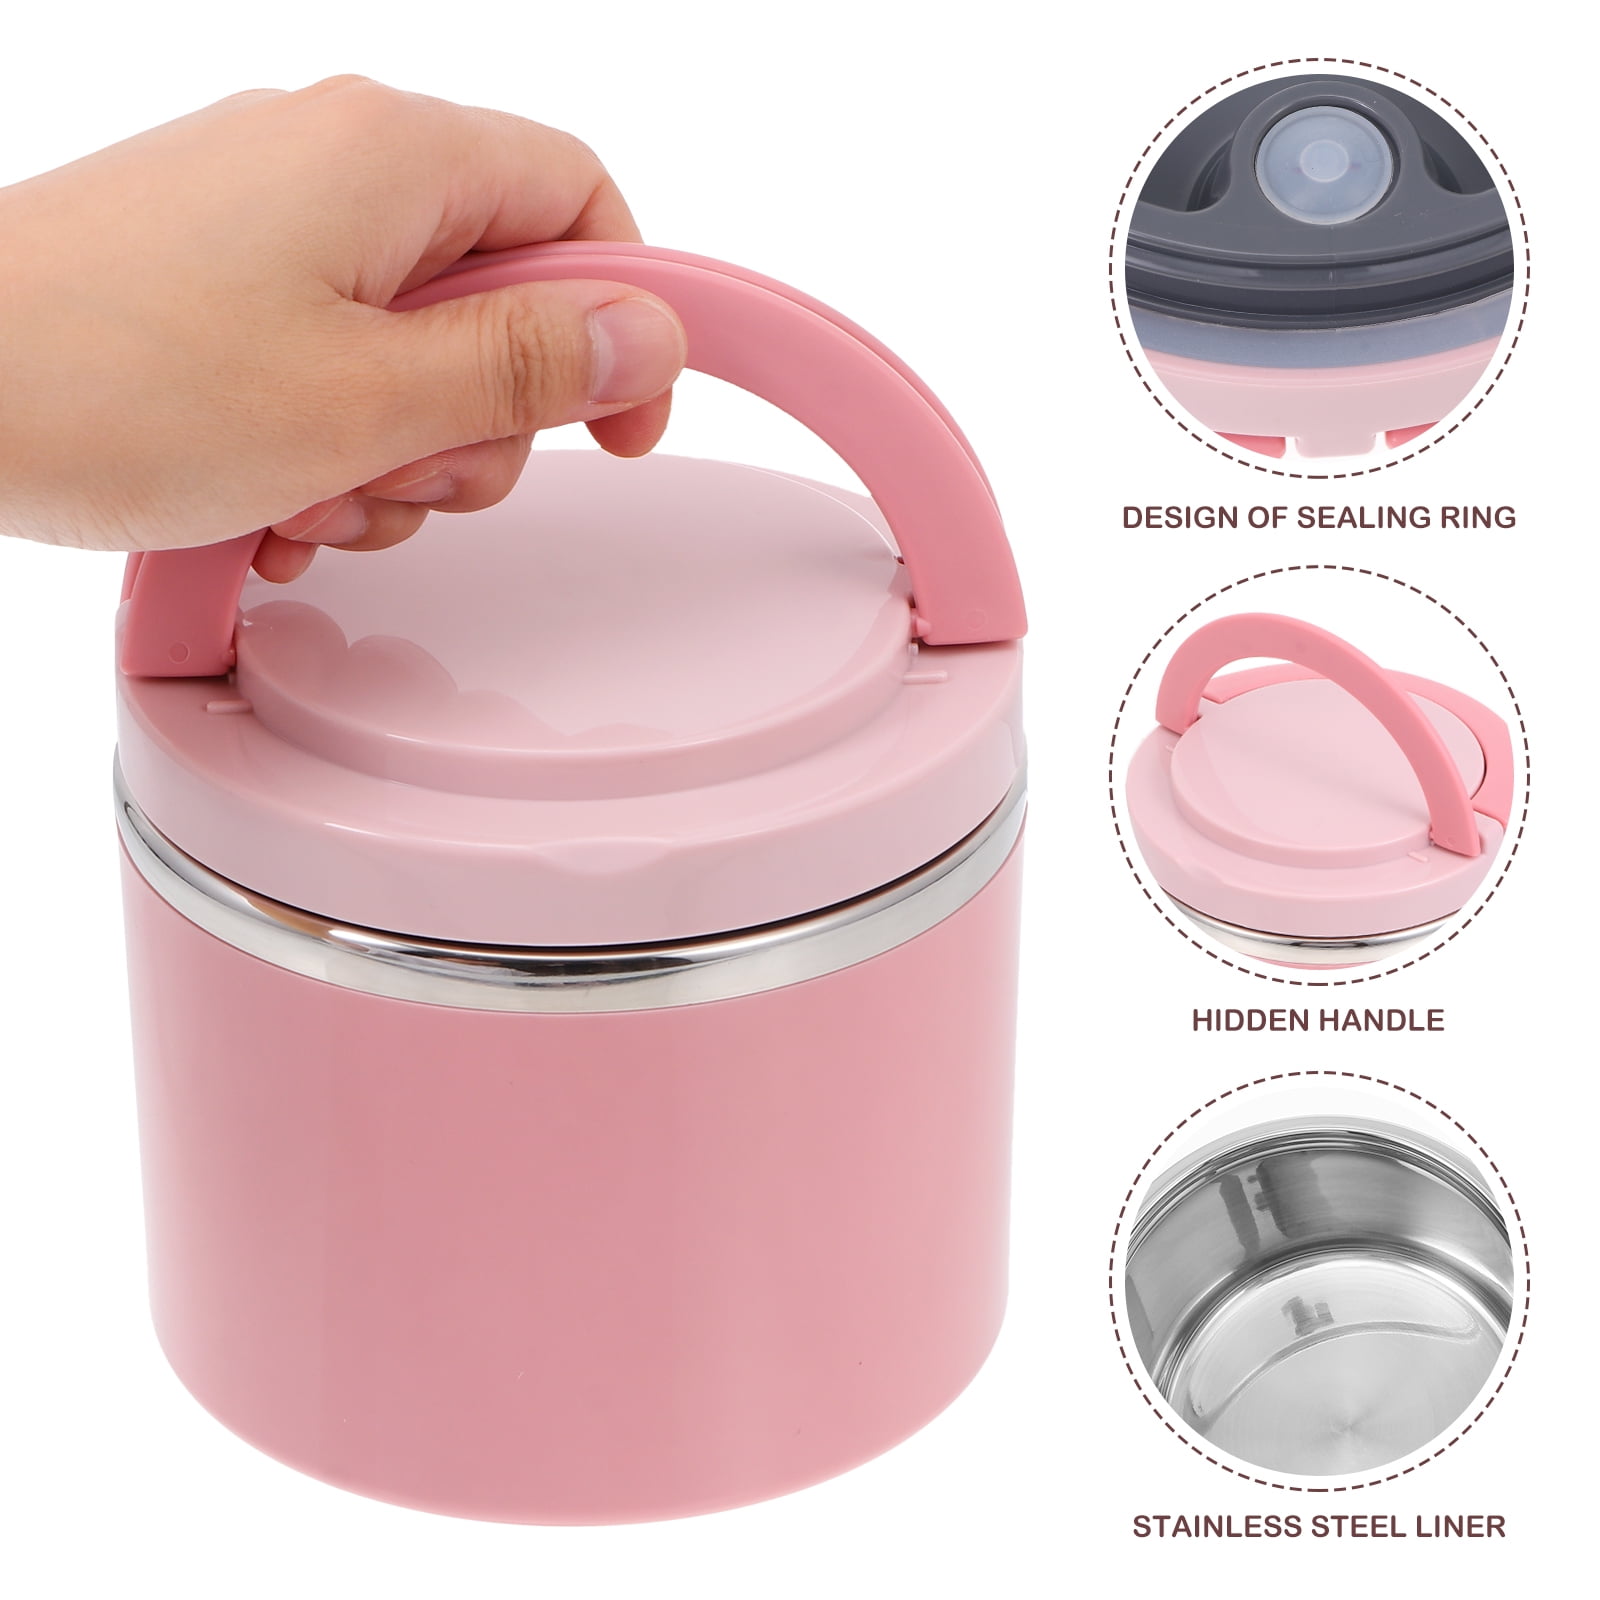 Brrnoo Stainless Steel Thermal Lunch Box, Stackable Hot Food Insulated Box  Round Sealed Food Containers Pink